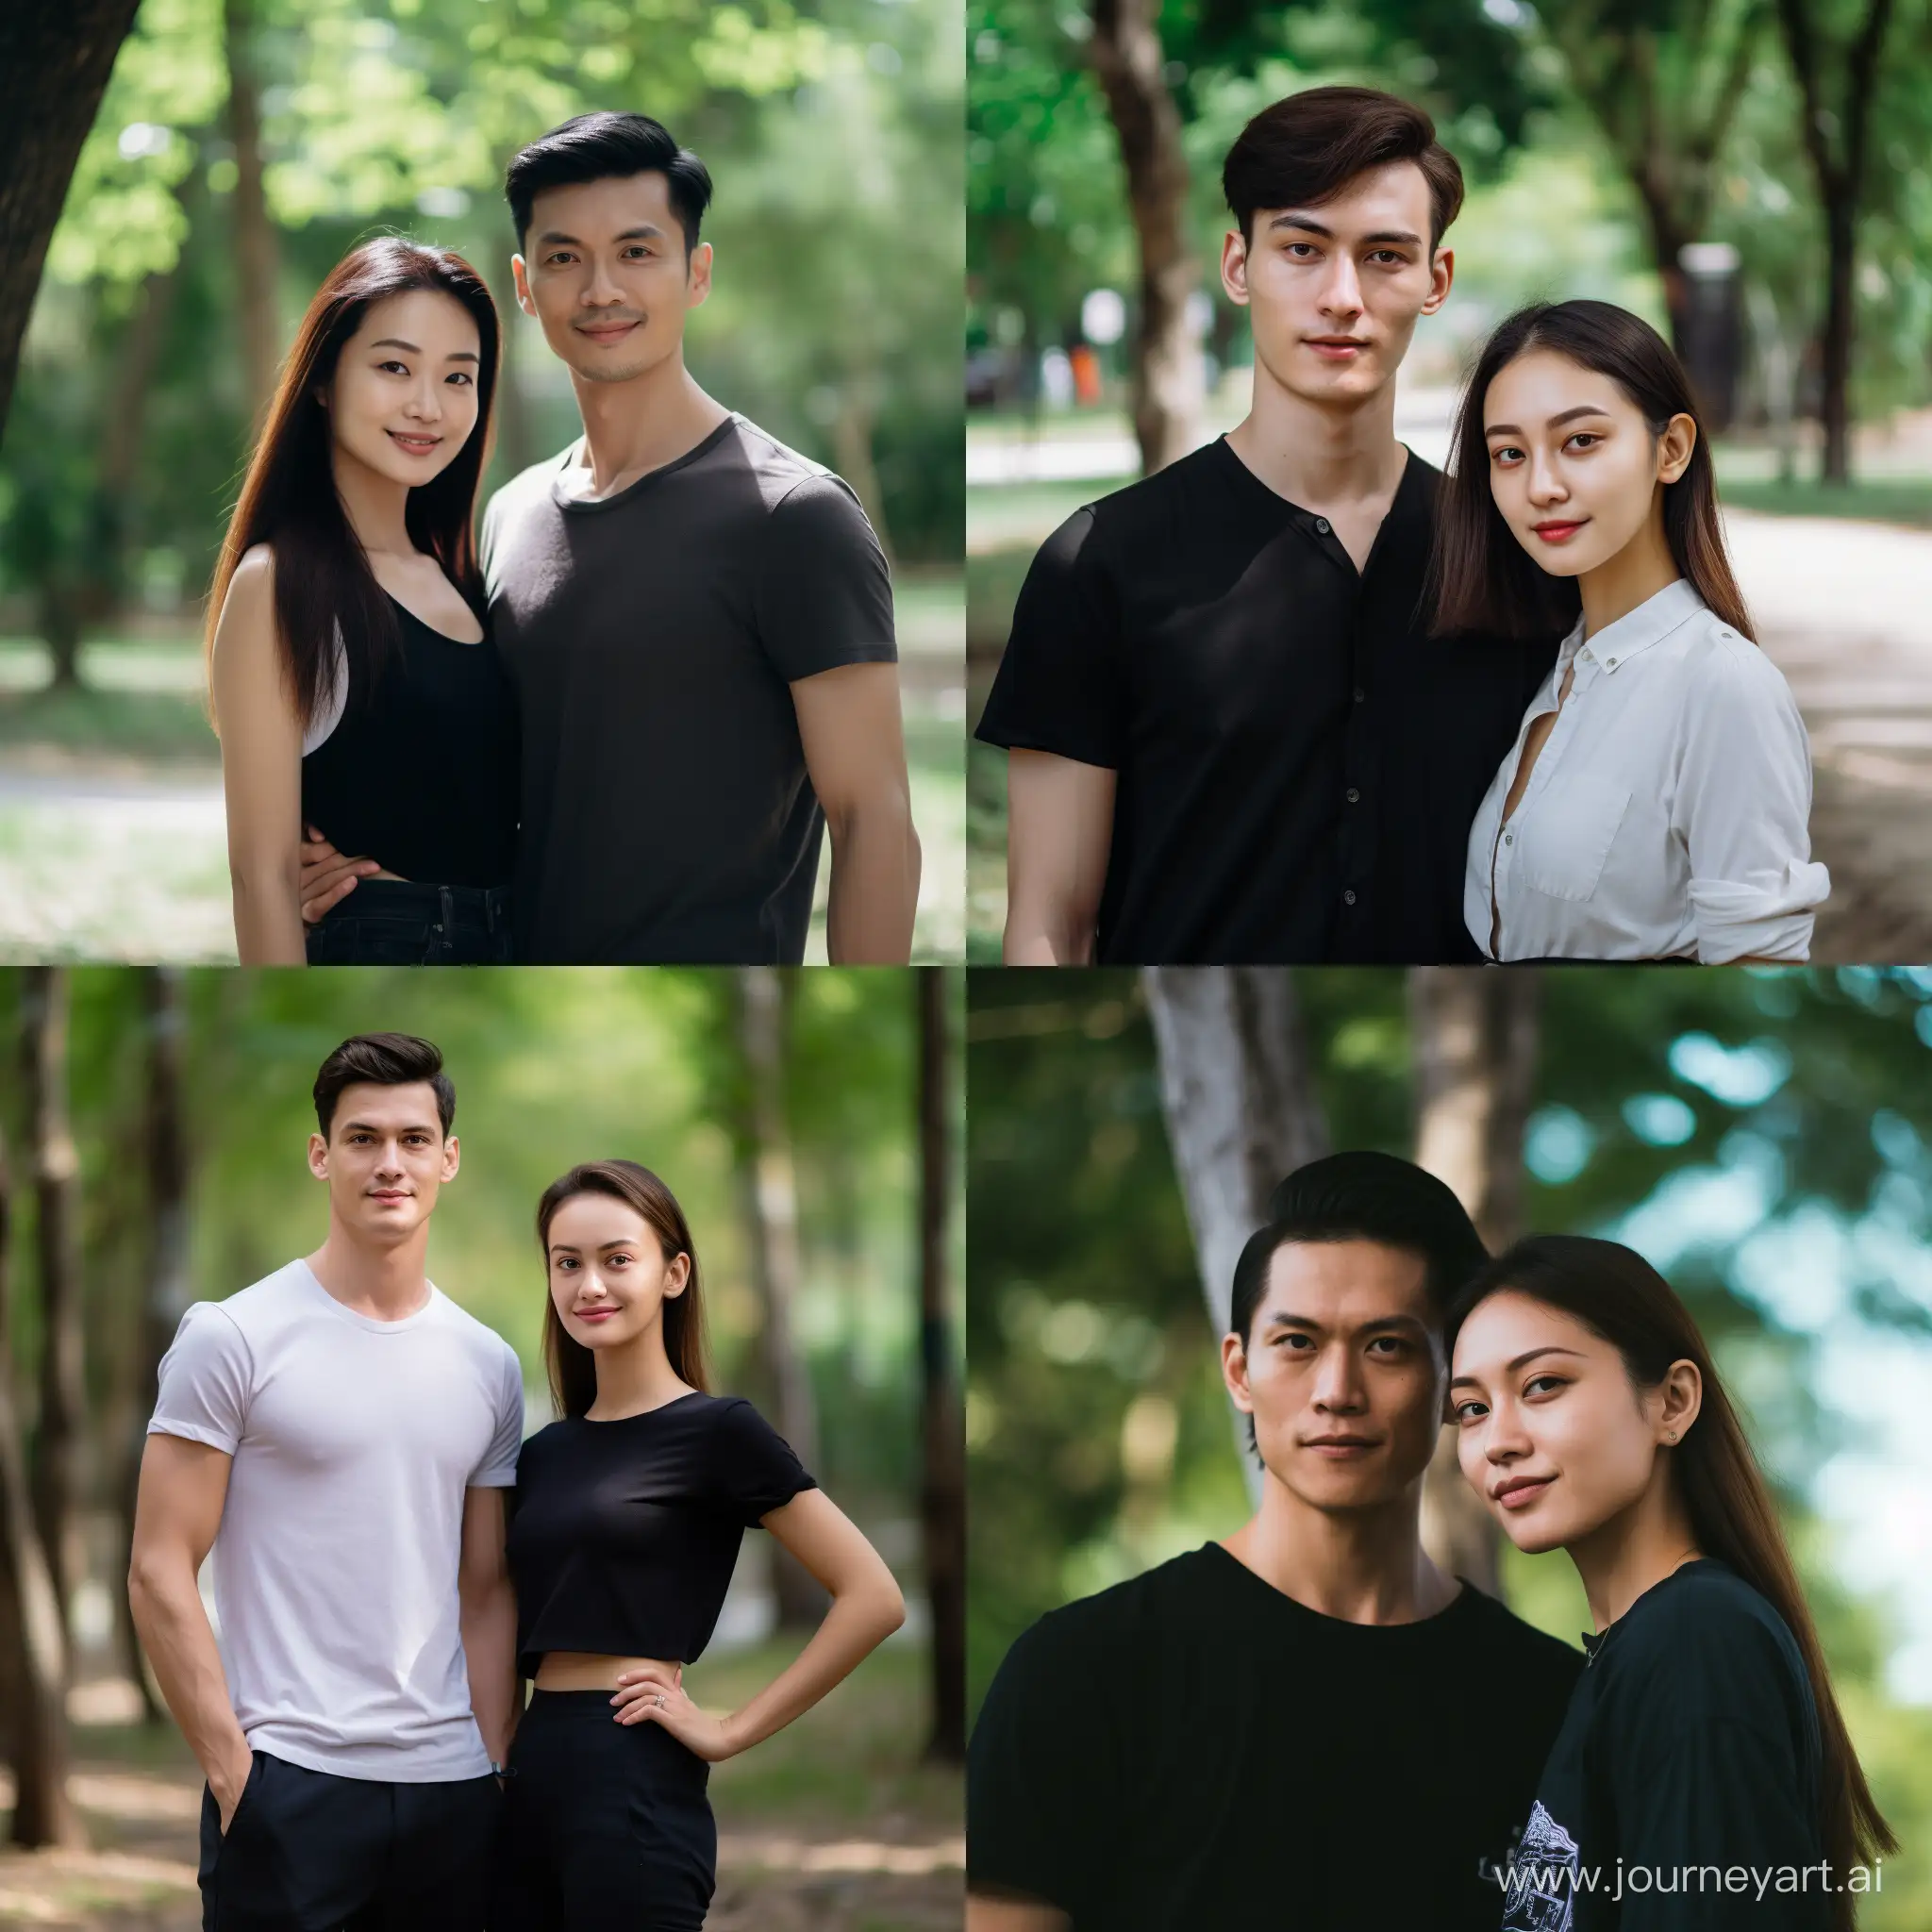 /imagine prompt: A male and female, both showcasing a harmonious blend of Malaysian Chinese and Croatian Serbian features, standing side by side in a serene park setting. The environment exudes a calm and natural atmosphere with gentle sunlight filtering through the trees. The style is high-resolution portrait photography, capturing every detail. Camera: Canon EOS R5 with a prime lens for sharp, detailed portraits. --ar 1:1